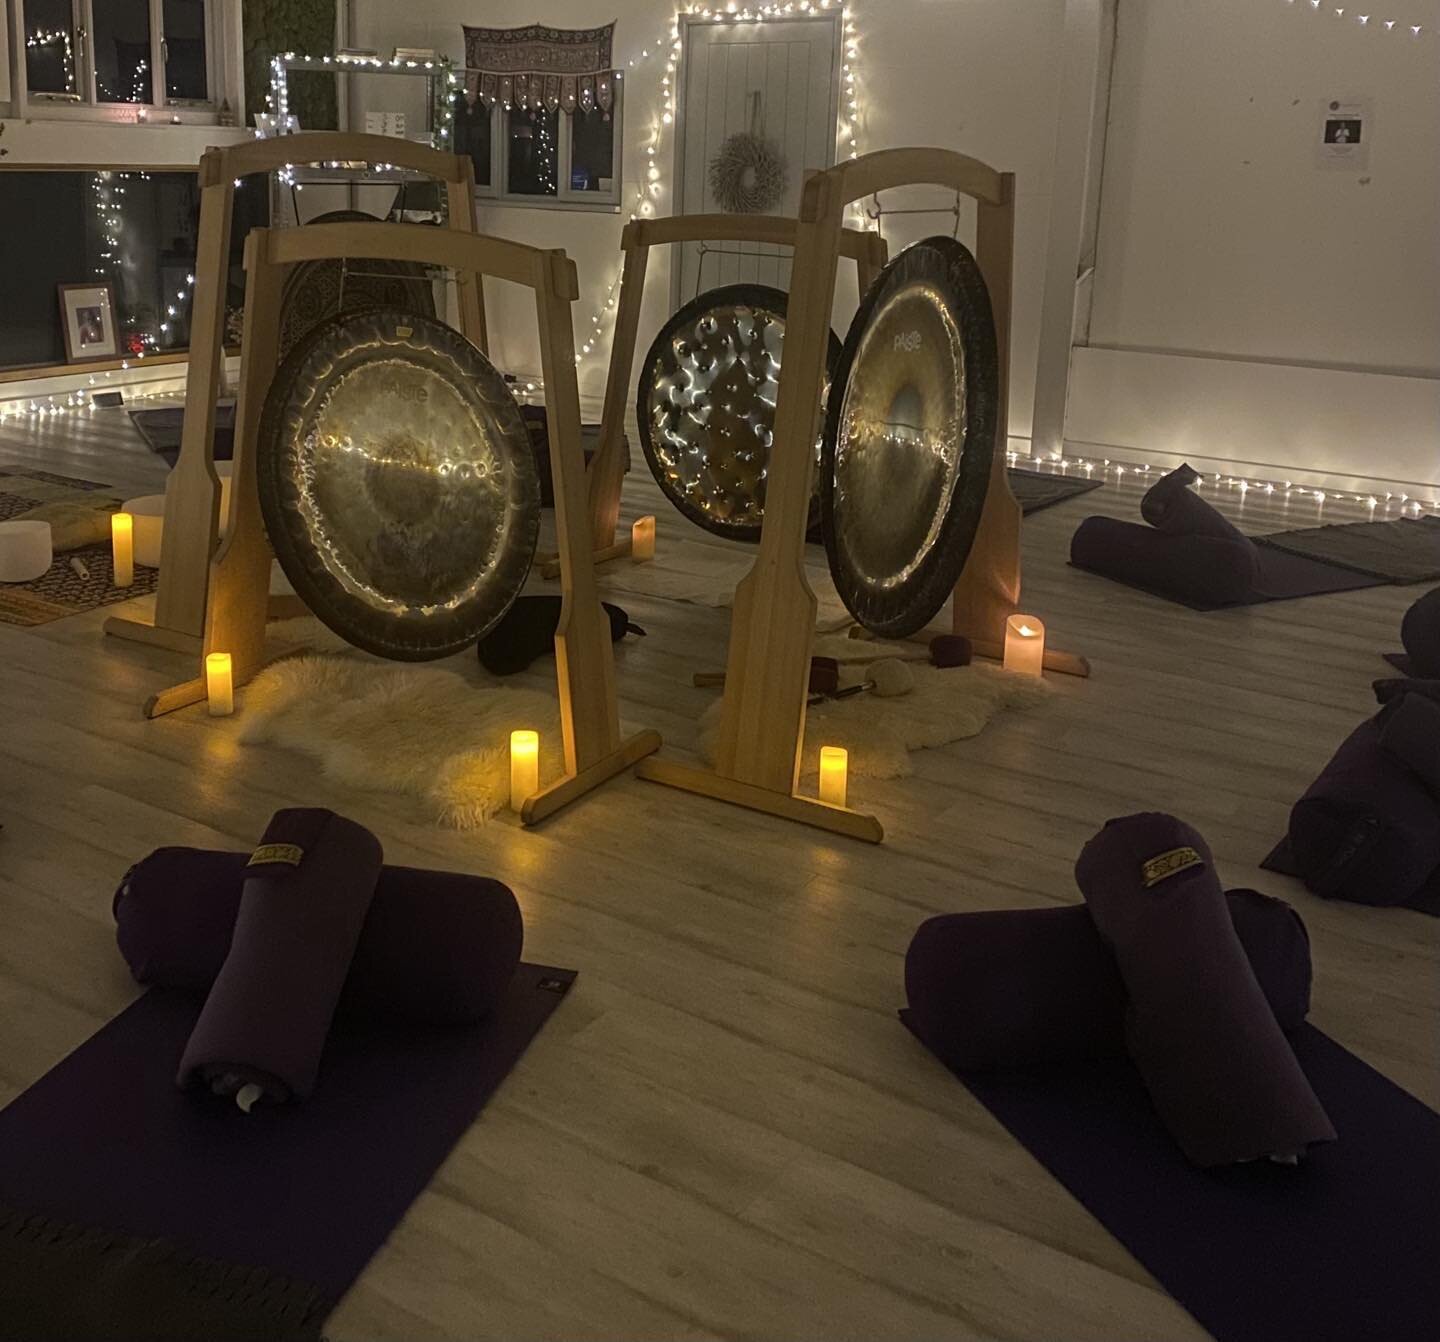 -Couple of spaces left for our welcoming Spring Soltice (21t) sound bath tomorrow evening 15th March@ Little Easton - preparing for the light 🙏 booking : lollikimpton@mac.com